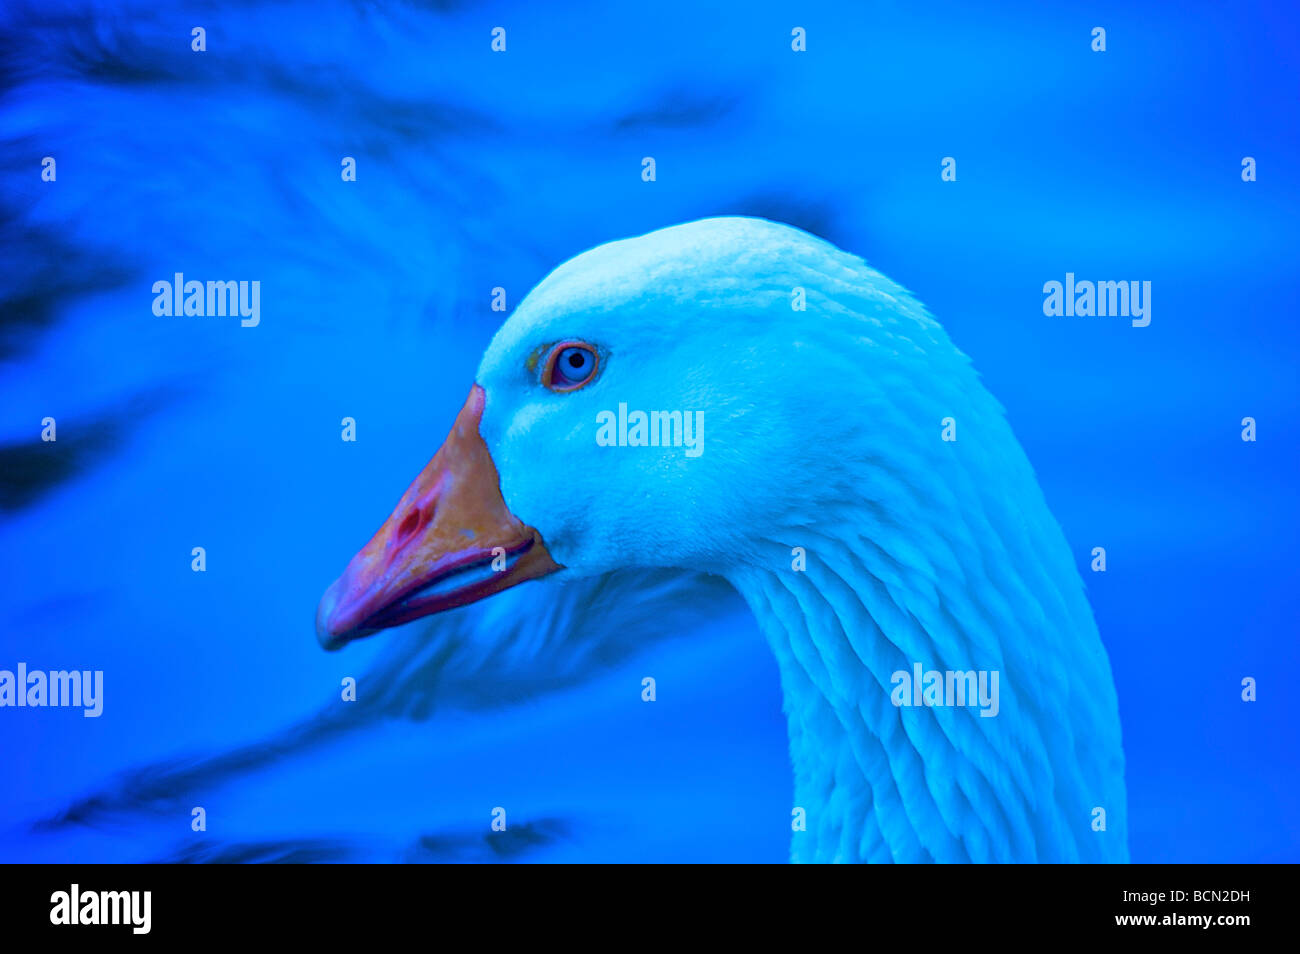 Close up of Blue toned goose against water Stock Photo